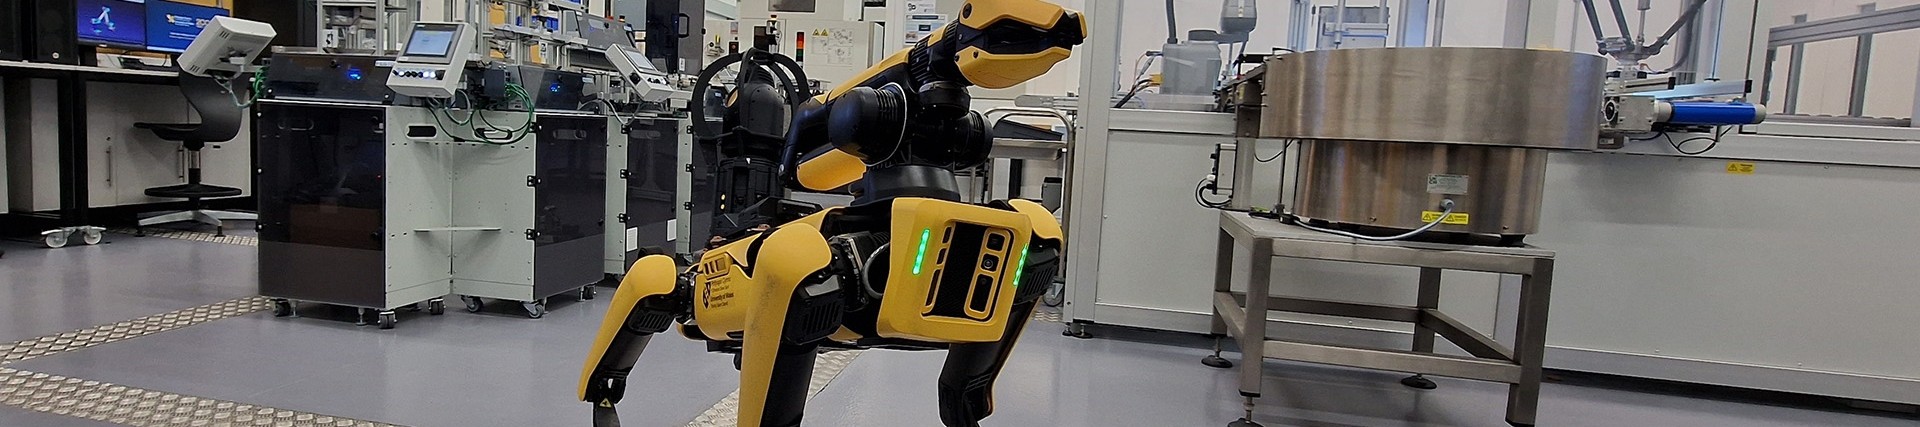 A black and yellow robotic dog standing in a robotics workshop.